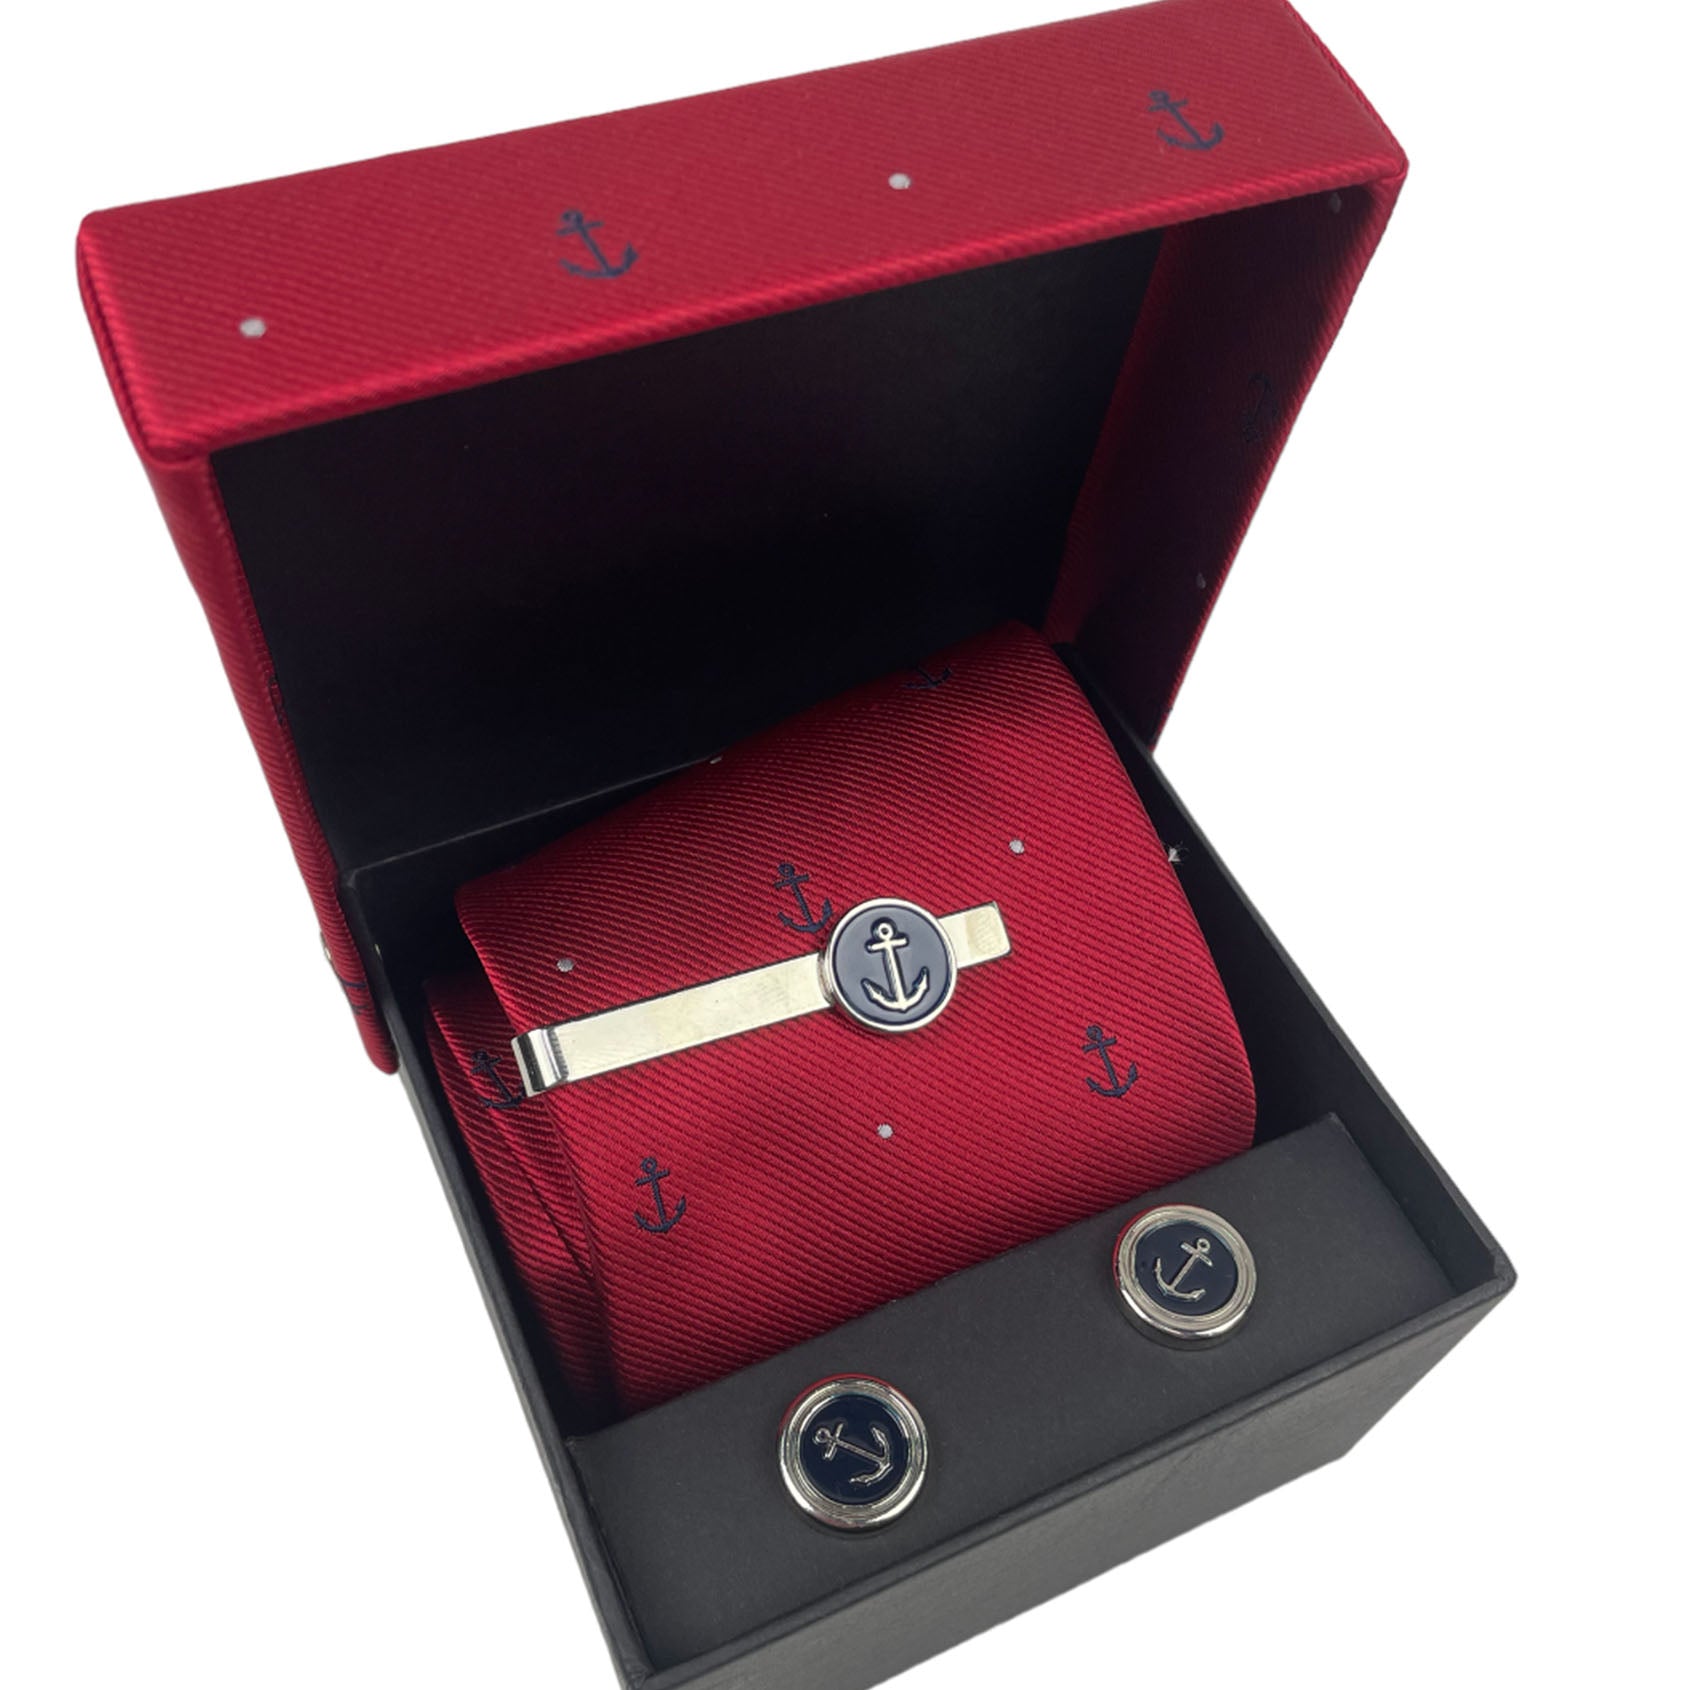 Red gift set with tie pin, tie and cufflinks